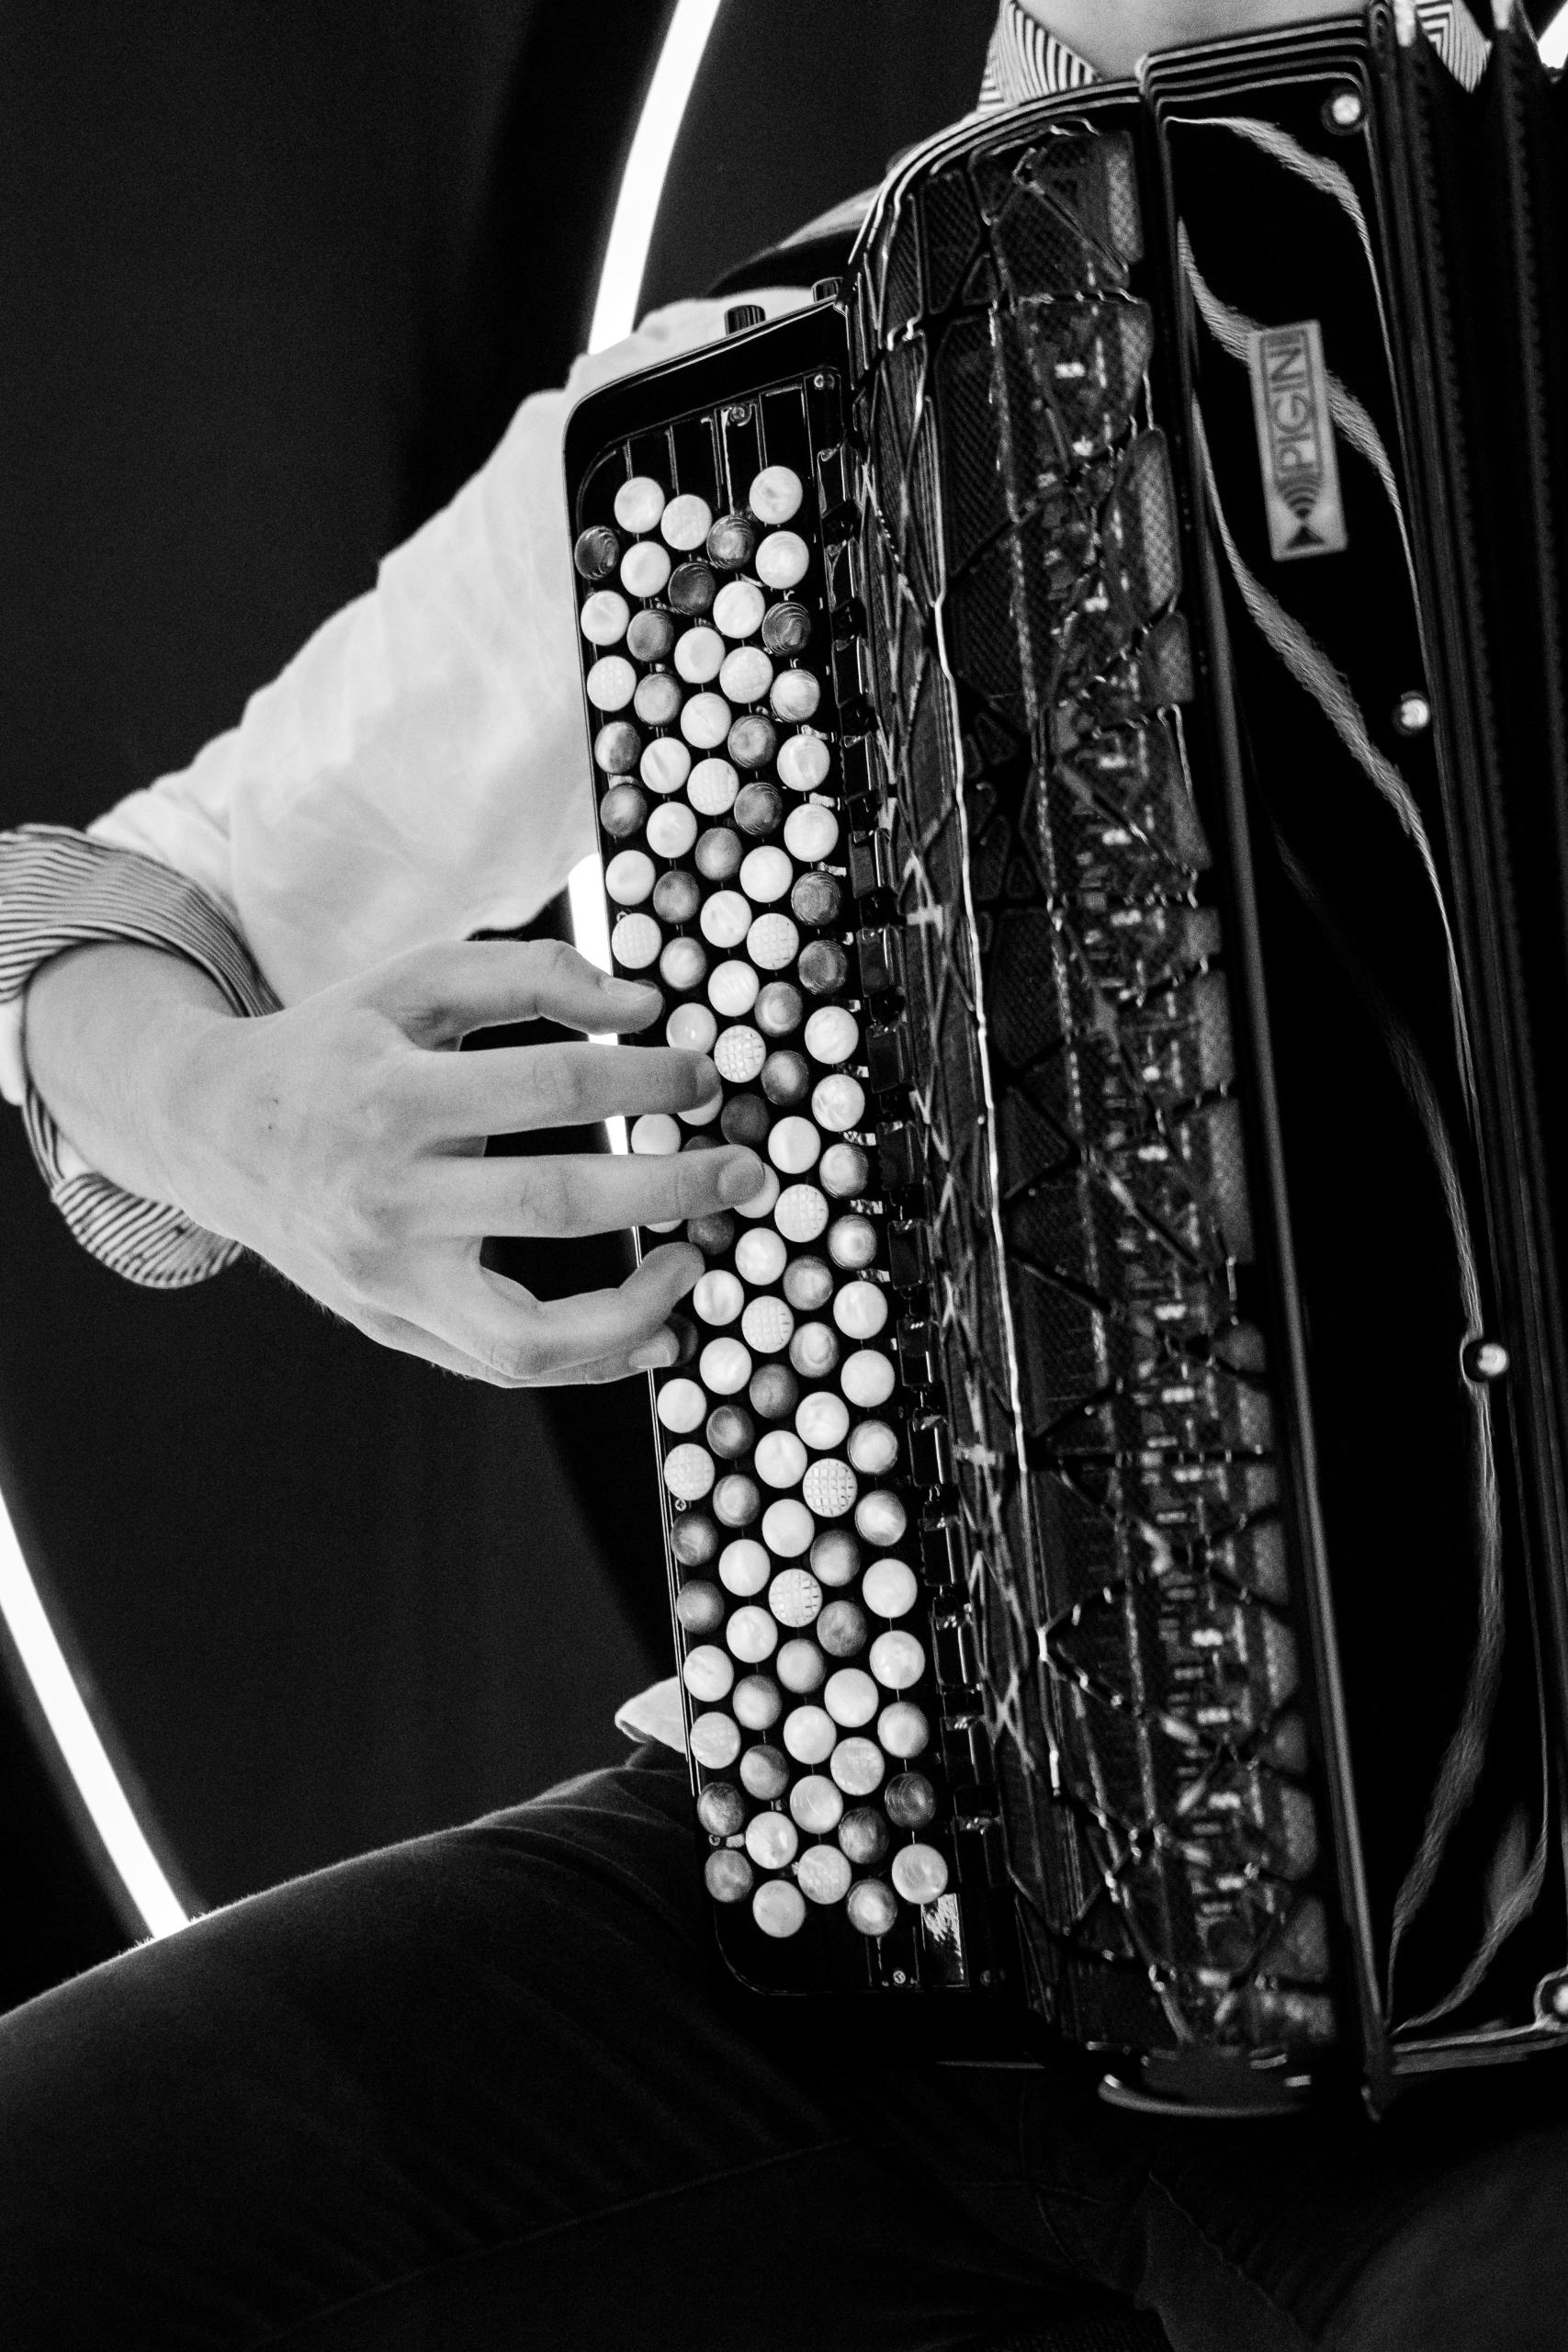 An accordion or harmonica, you can see a hand operating the keys.